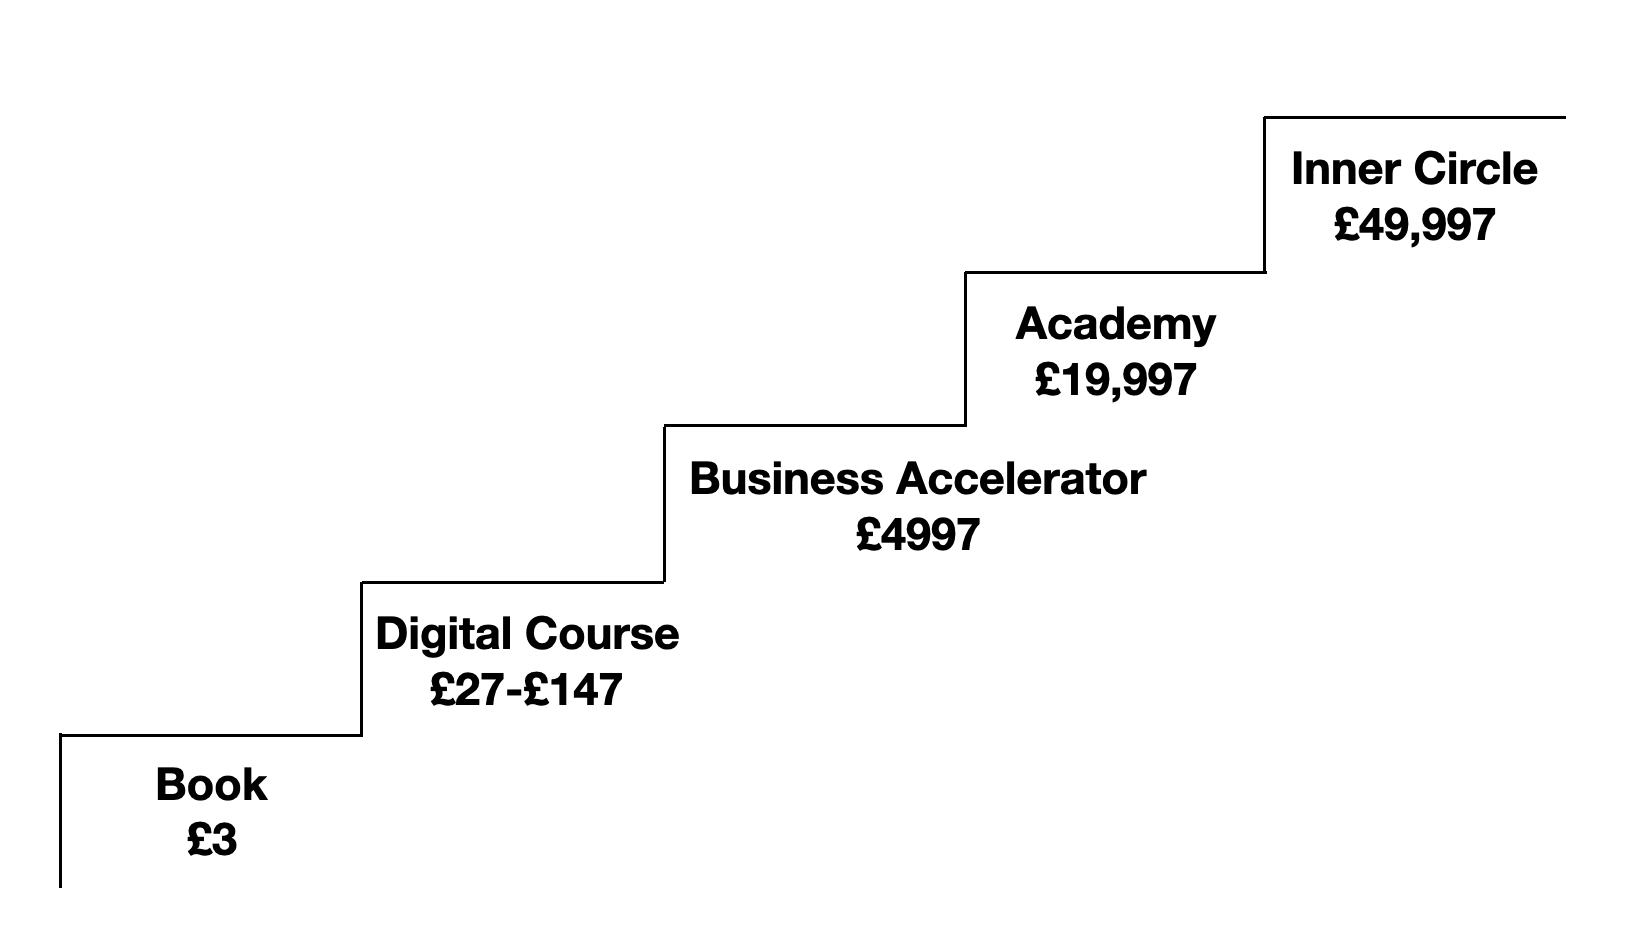 Business Accelerator Product Ladder